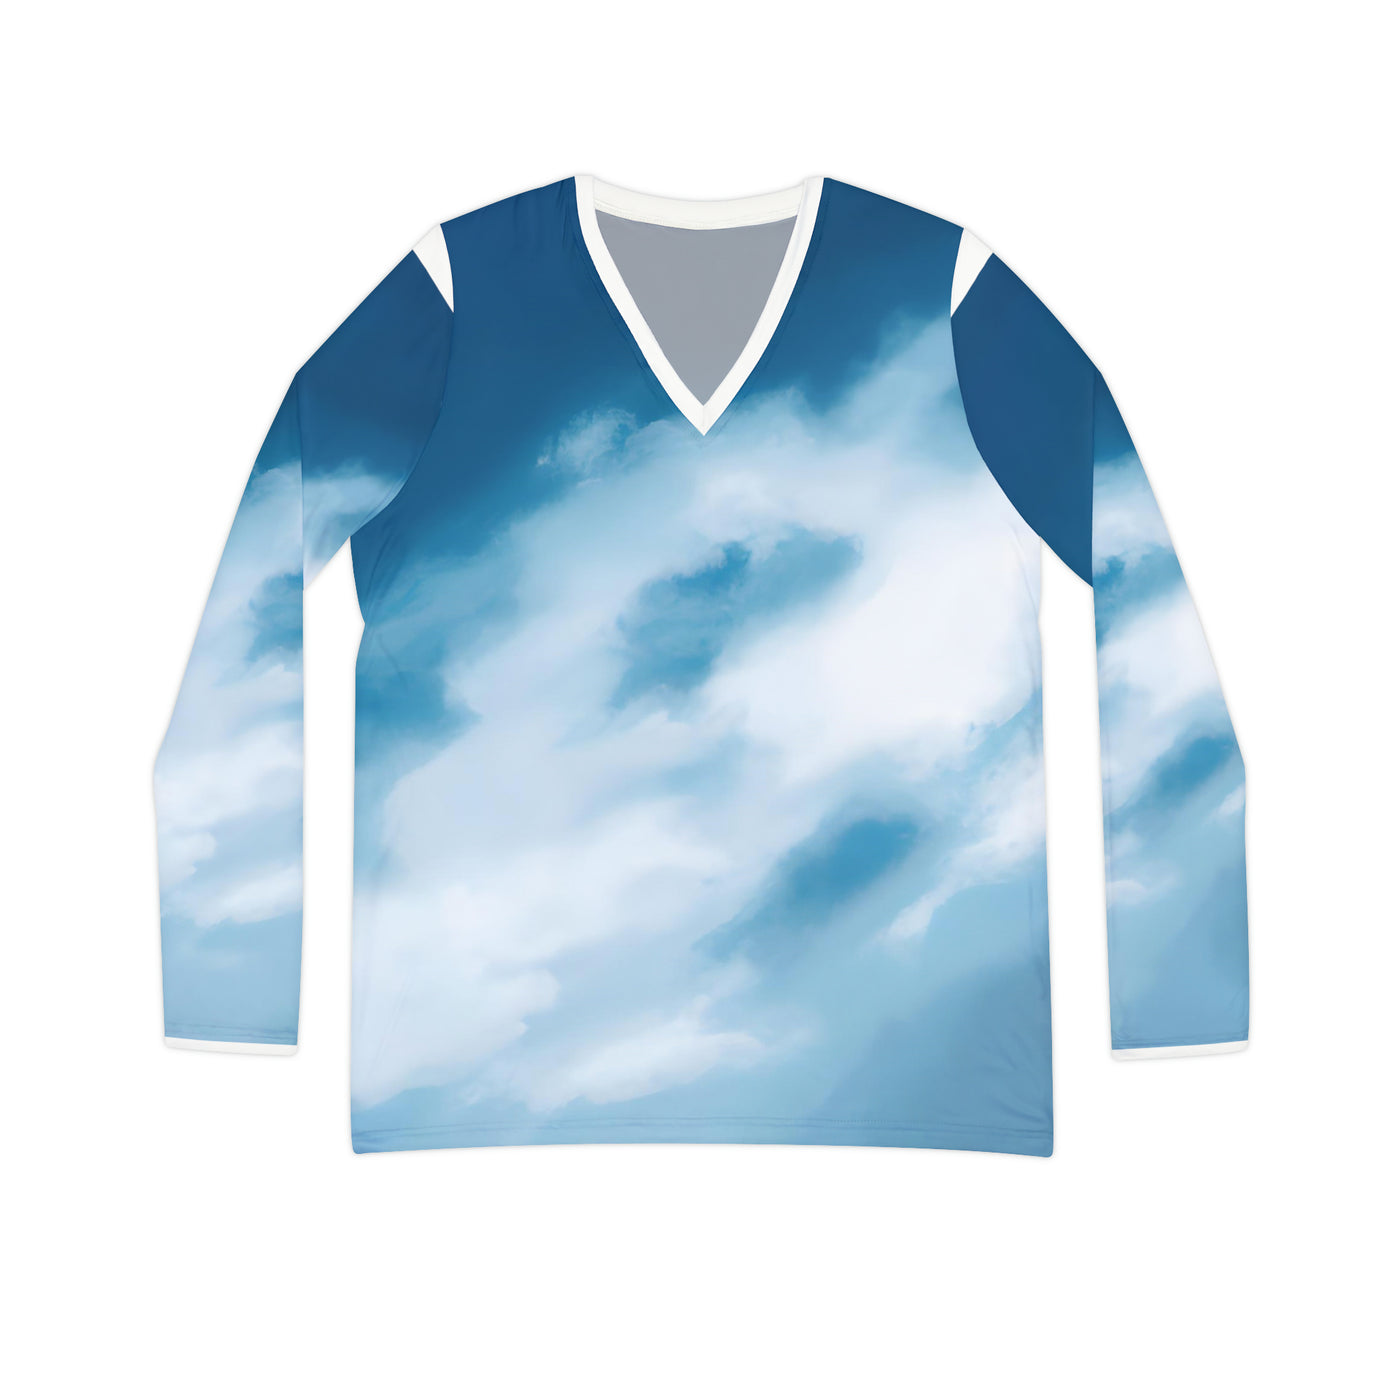 "Amazingly Awesome, Cloudy Skies!" Women's Long Sleeve V-neck Shirt